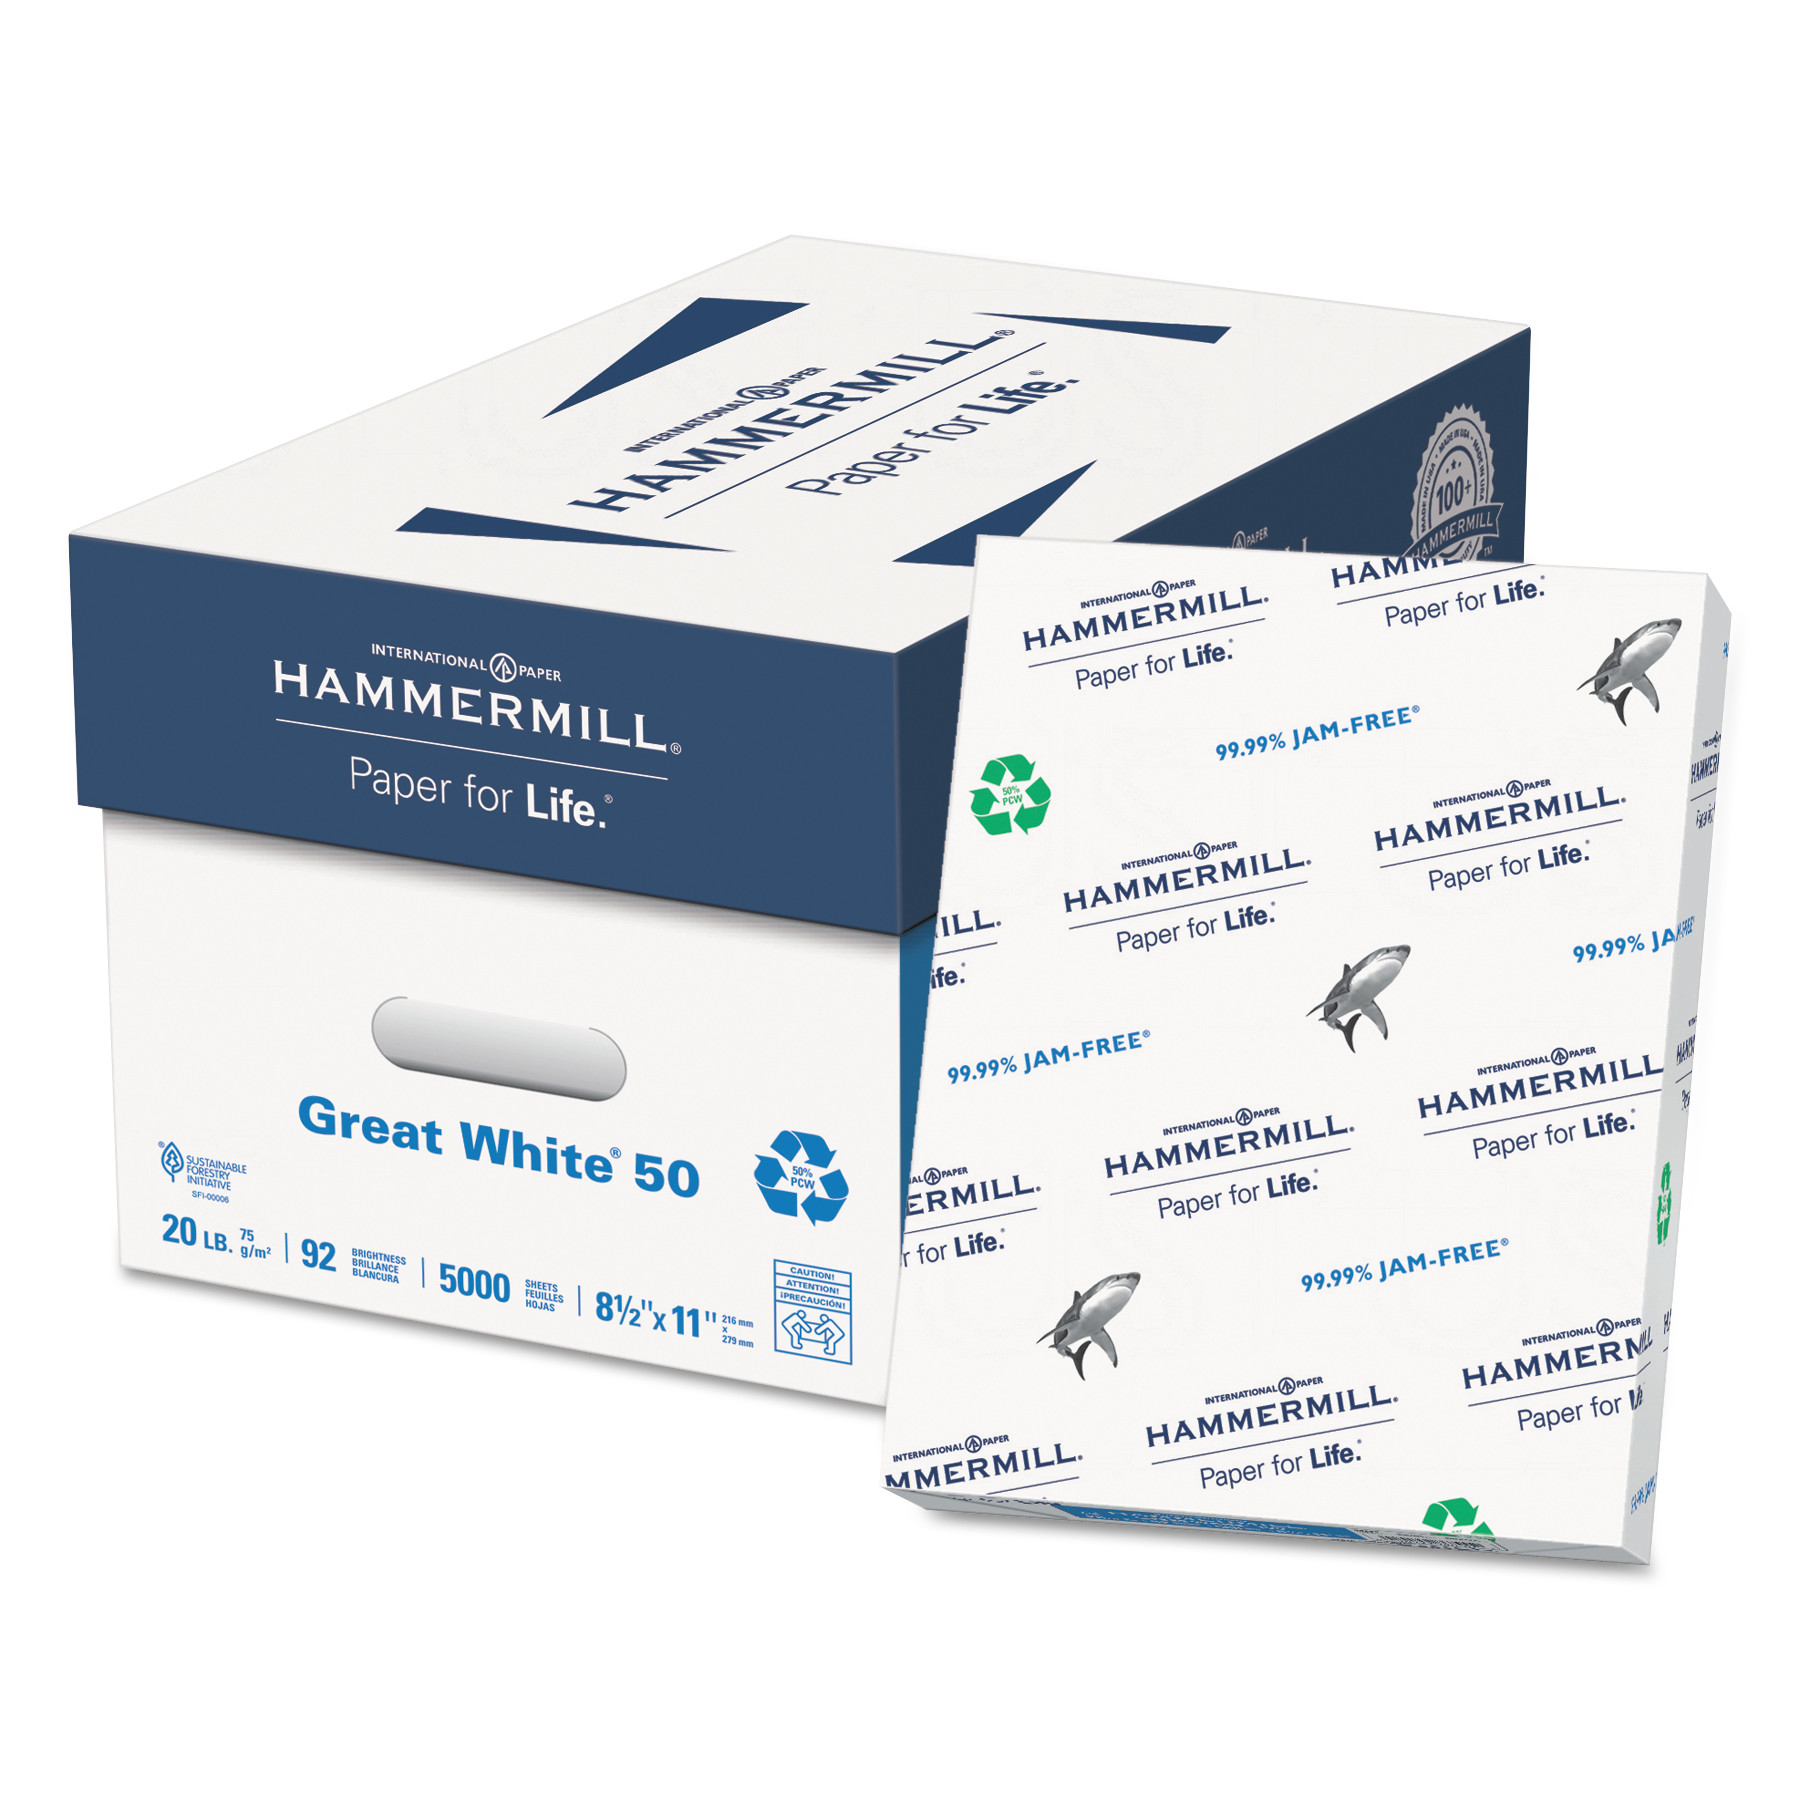  Hammermill 86780 Great White 50 Recycled Print Paper, 92 Bright, 20lb, 8.5 x 11, White, 500 Sheets/Ream, 10 Reams/Carton (HAM86780) 